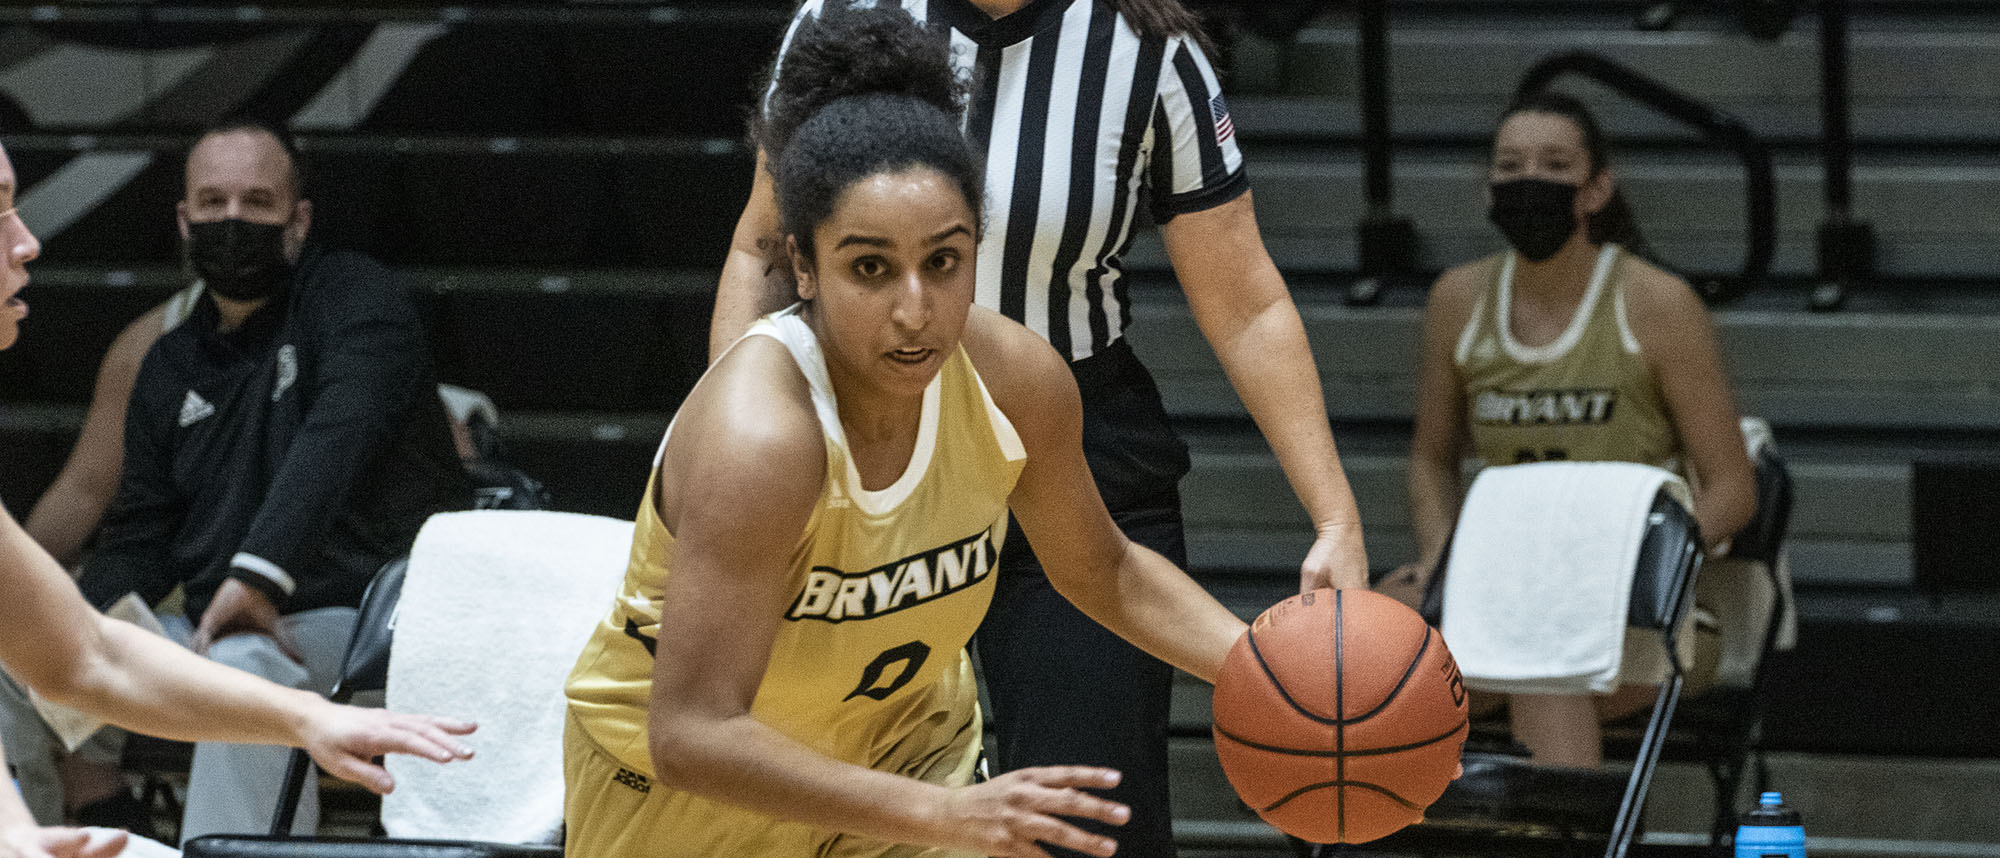 Bryant falls to SFU for first NEC loss